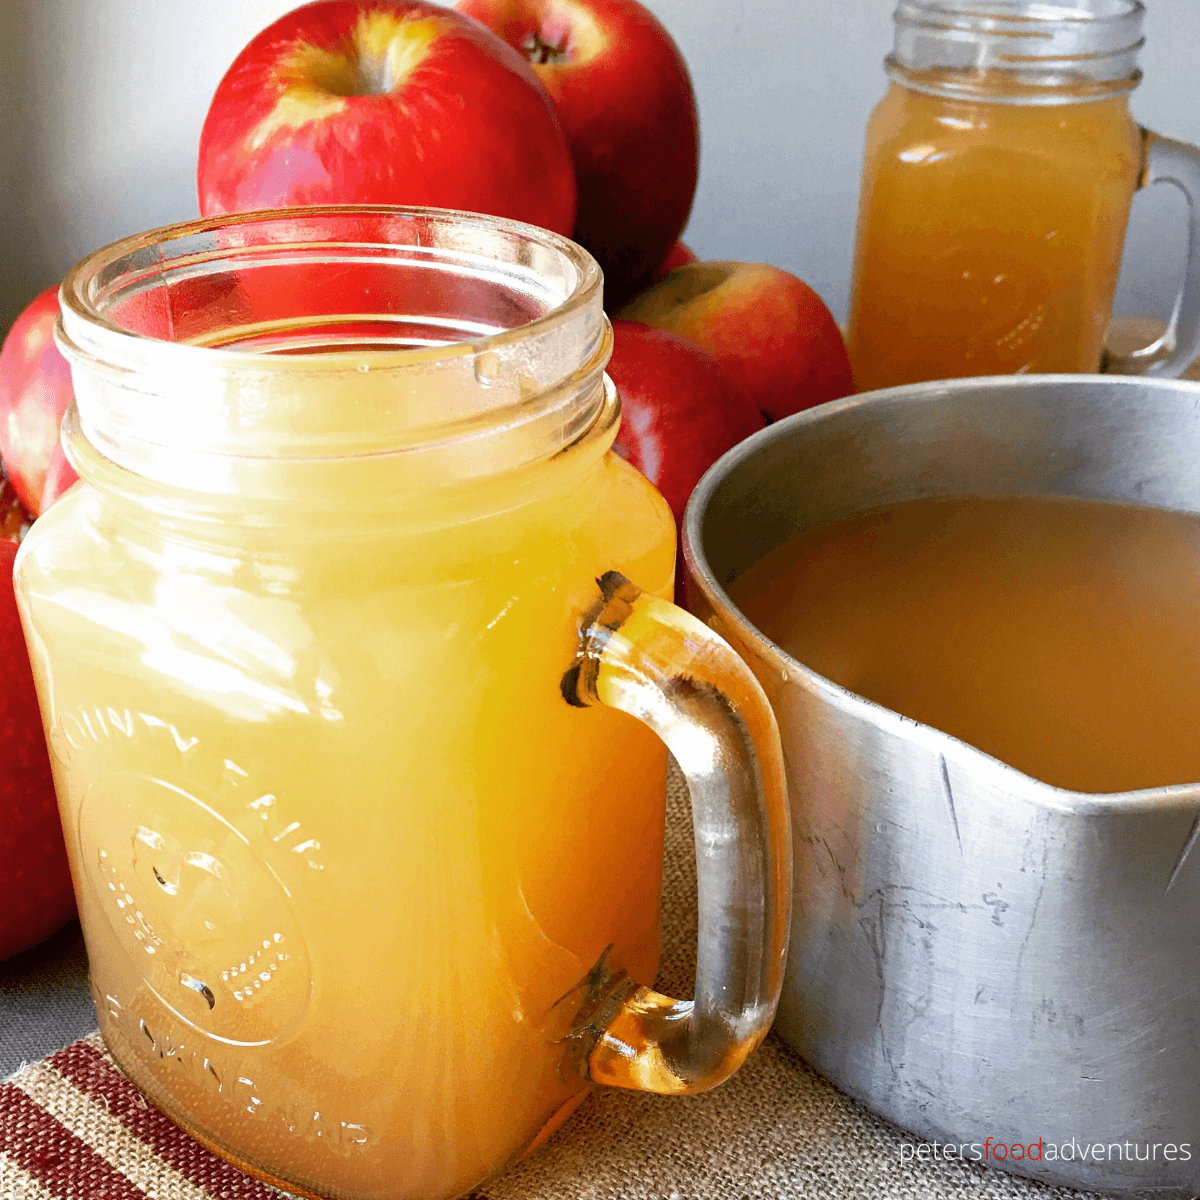 Hot Spiced Apple Cider - the aroma fills your whole house with this classic American spiced drink, especially popular during Thanksgiving and Christmas. This non-alcoholic mulled apple cider recipe is perfect for a cold chilly night, made with naturally cloudy apple juice